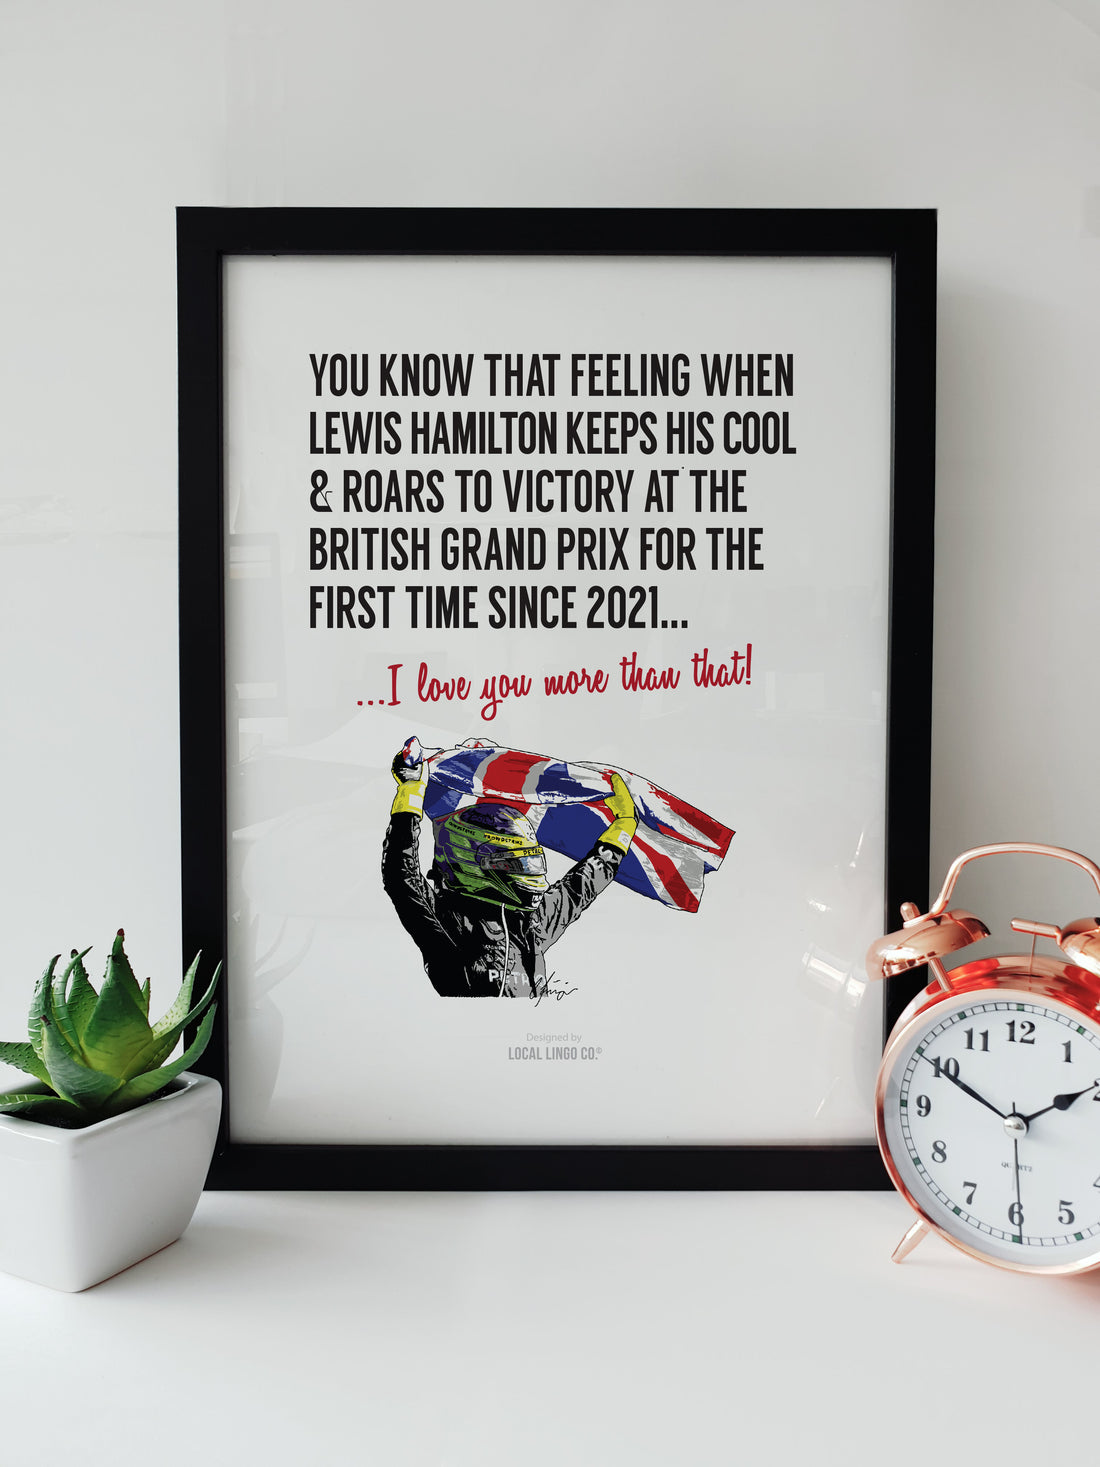 Lewis Hamilton British Grand Prix Victory 2024 Formula 1 Fan Artwork by Local Lingo, featuring an illustration of Hamilton celebrating with the Union Jack and bold text in a black frame.